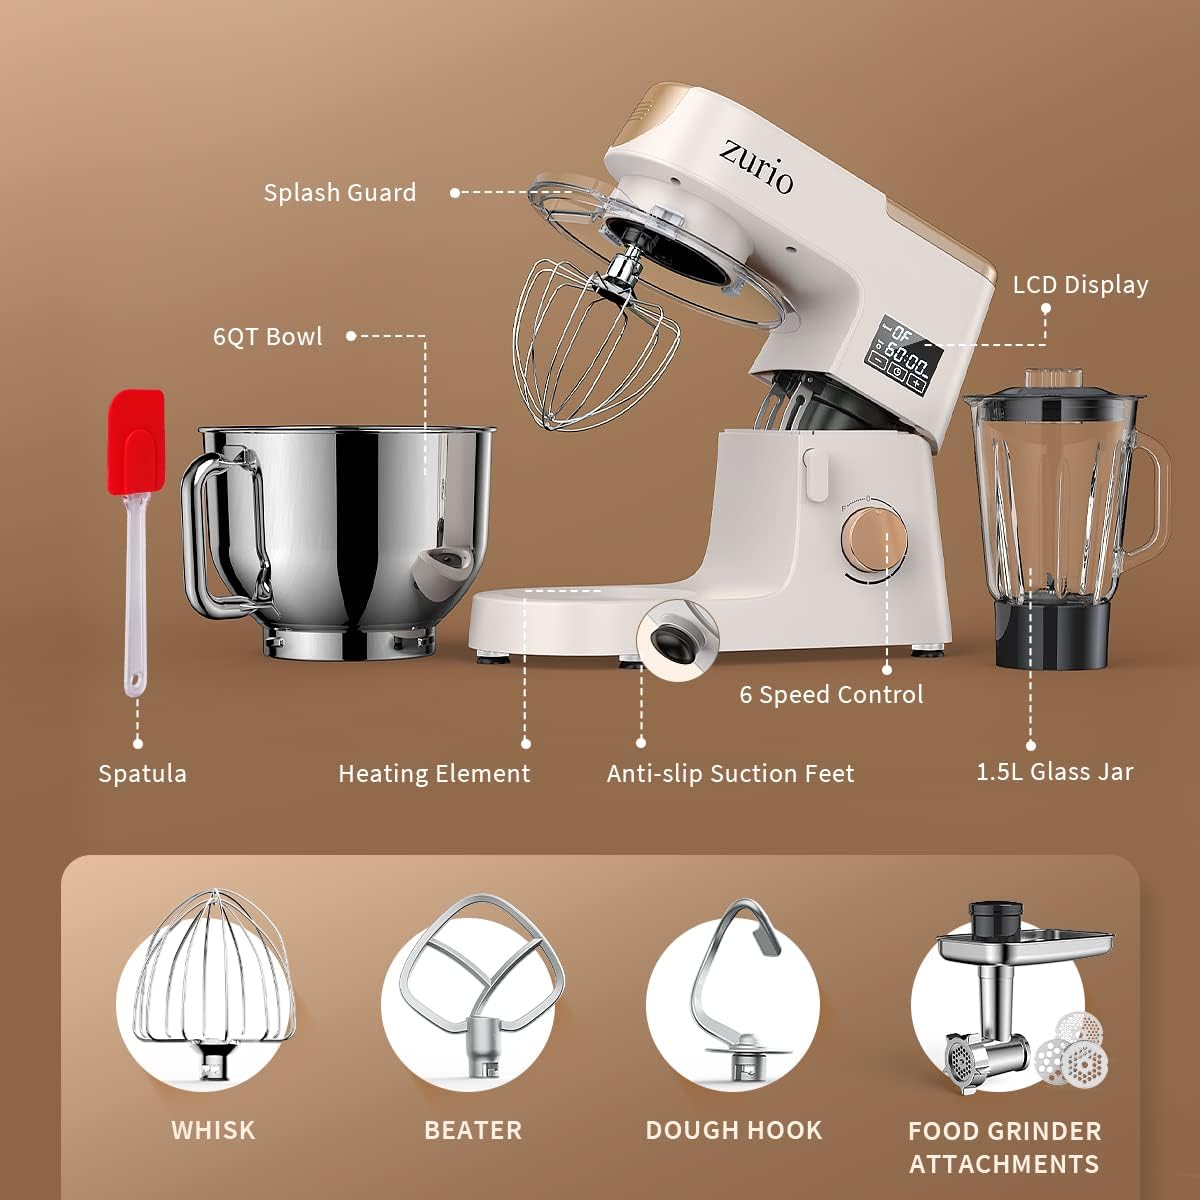 Generic Stand Mixer with Fermentation Function, 6 QT 660W Tilt-Head Food Mixer, 6-Speed, LCD Display with Timer